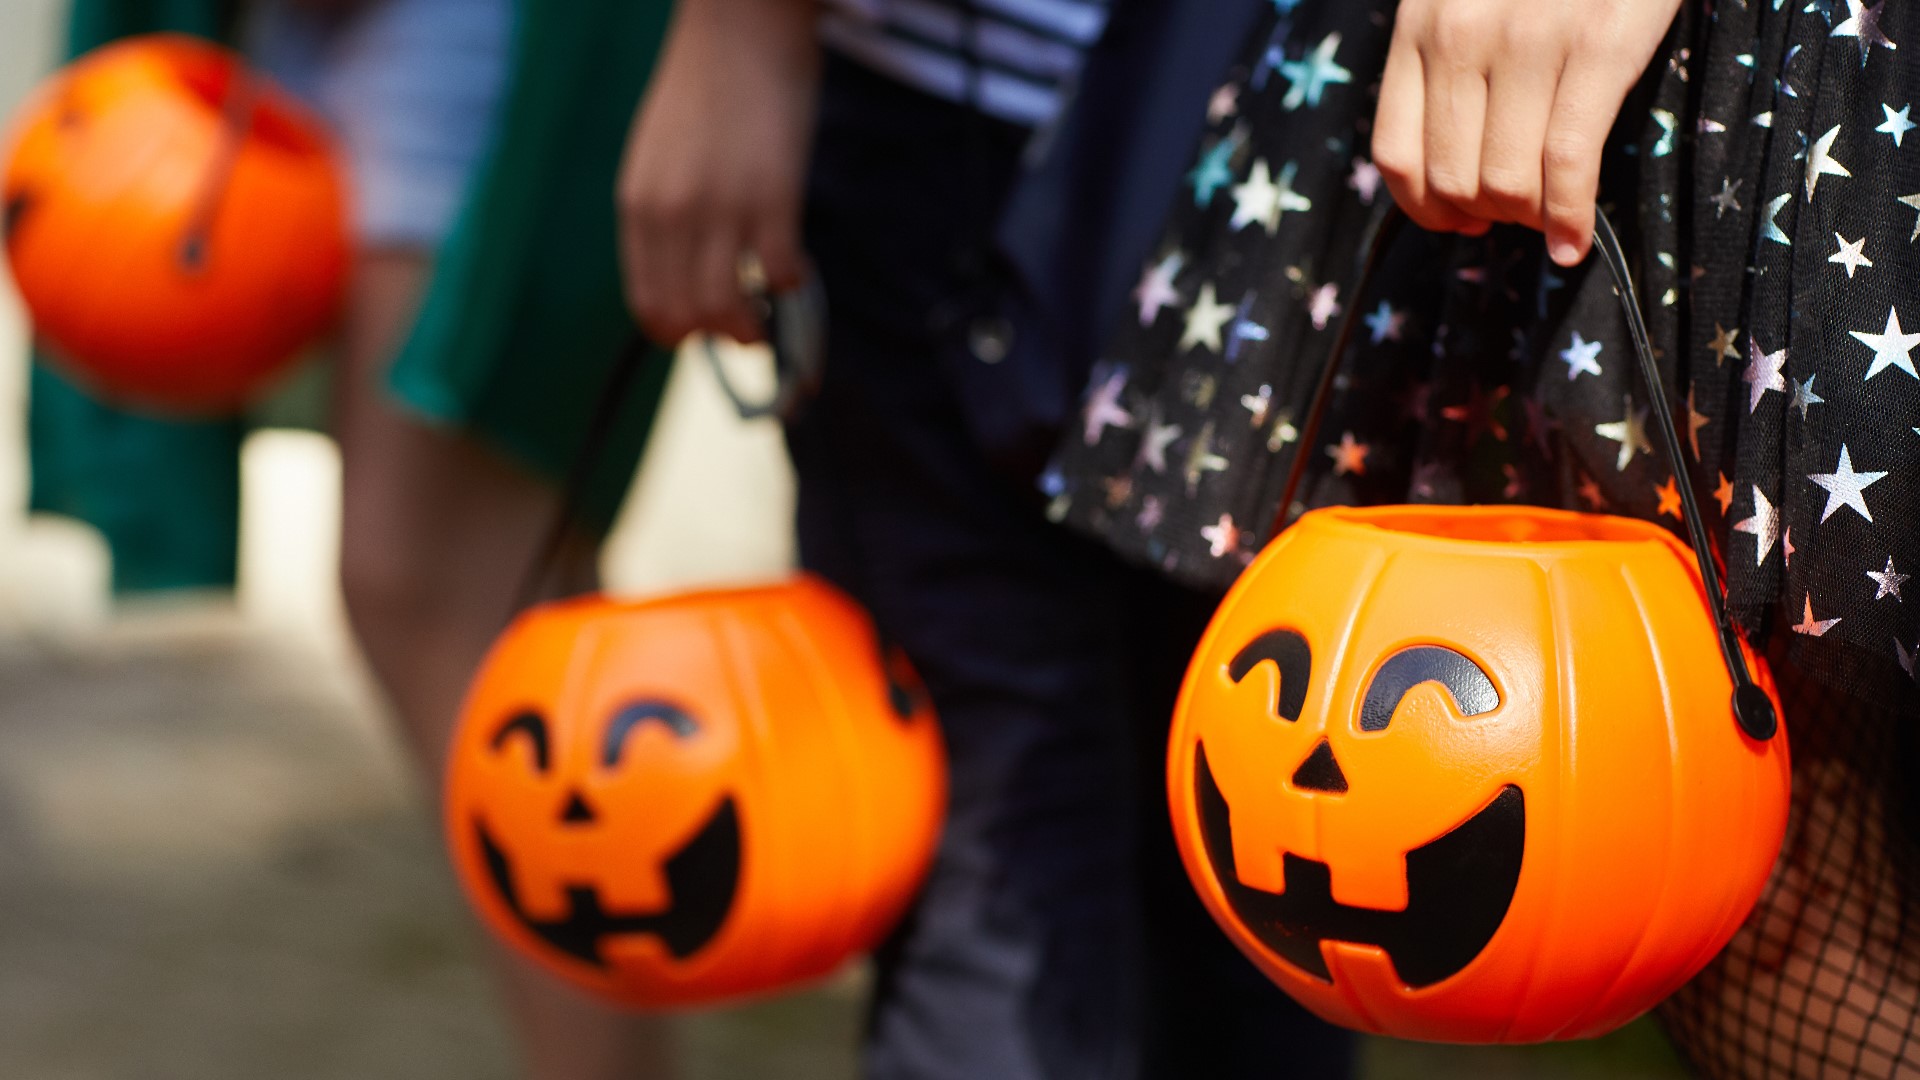 For some, you're never too old! For others... there's a fine line on when to hang up the Trick-or-Treat bucket.